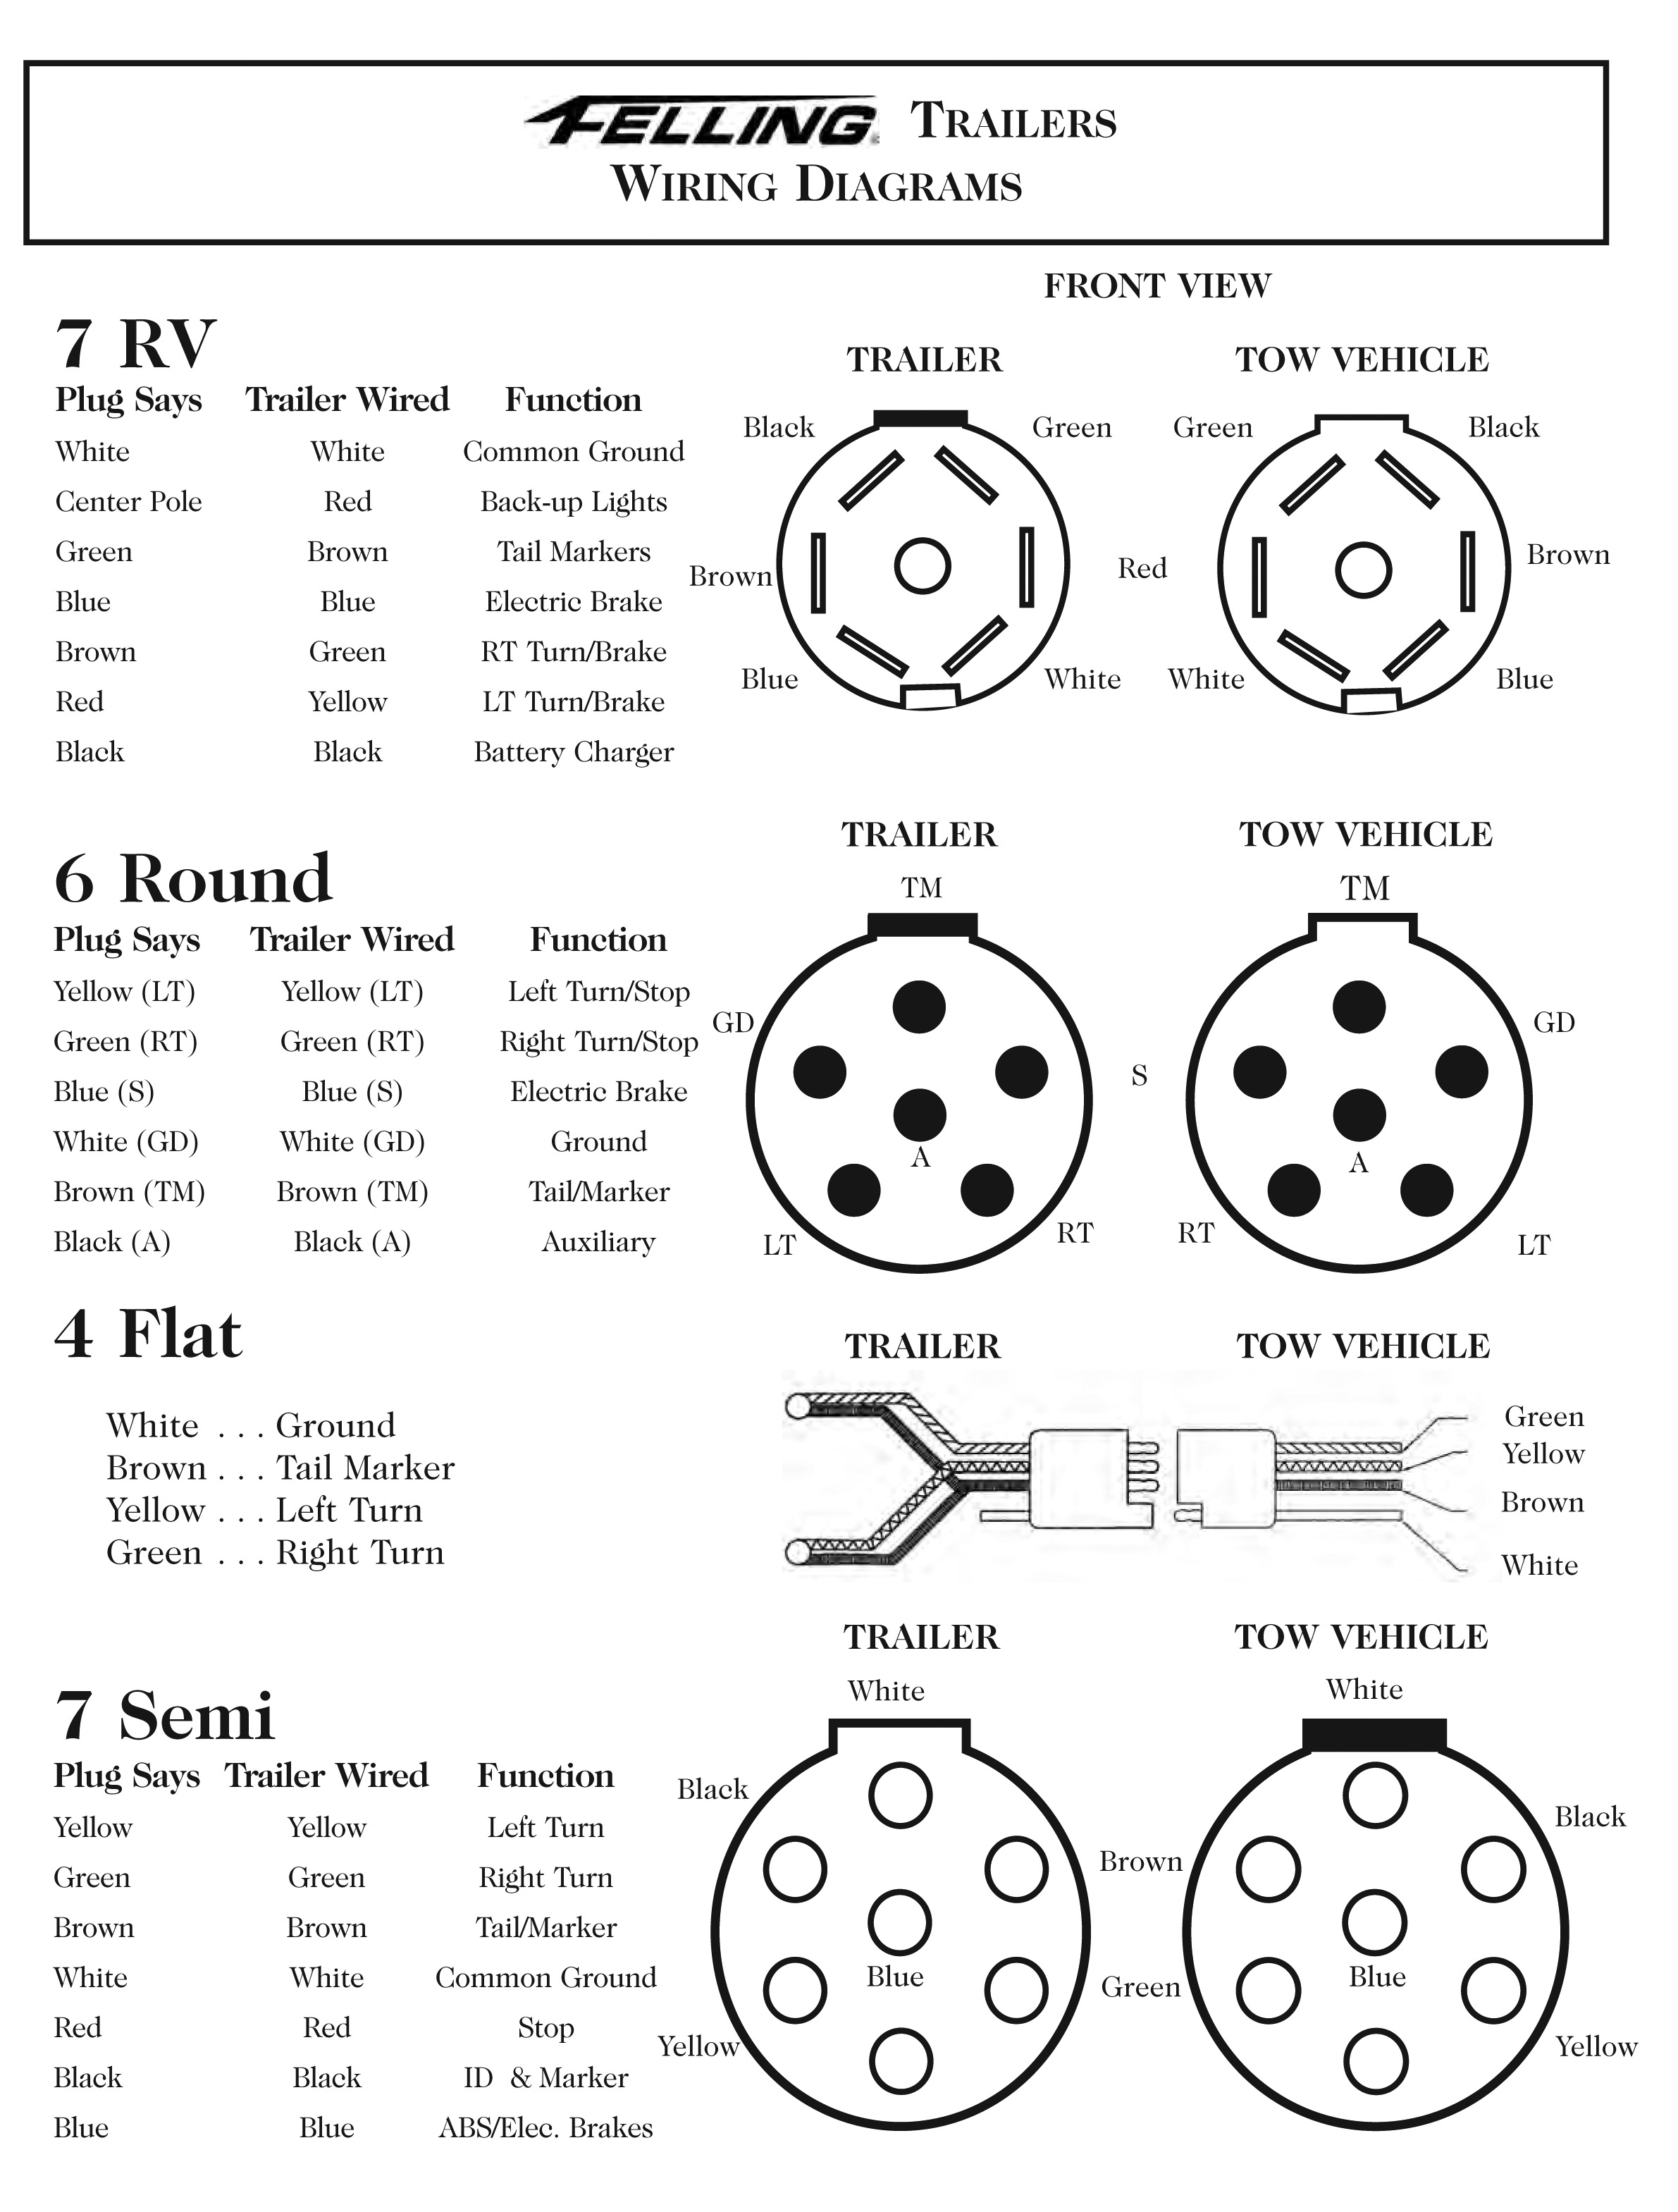 Trailer Light Connectors Wiring Diagram from www.felling.com